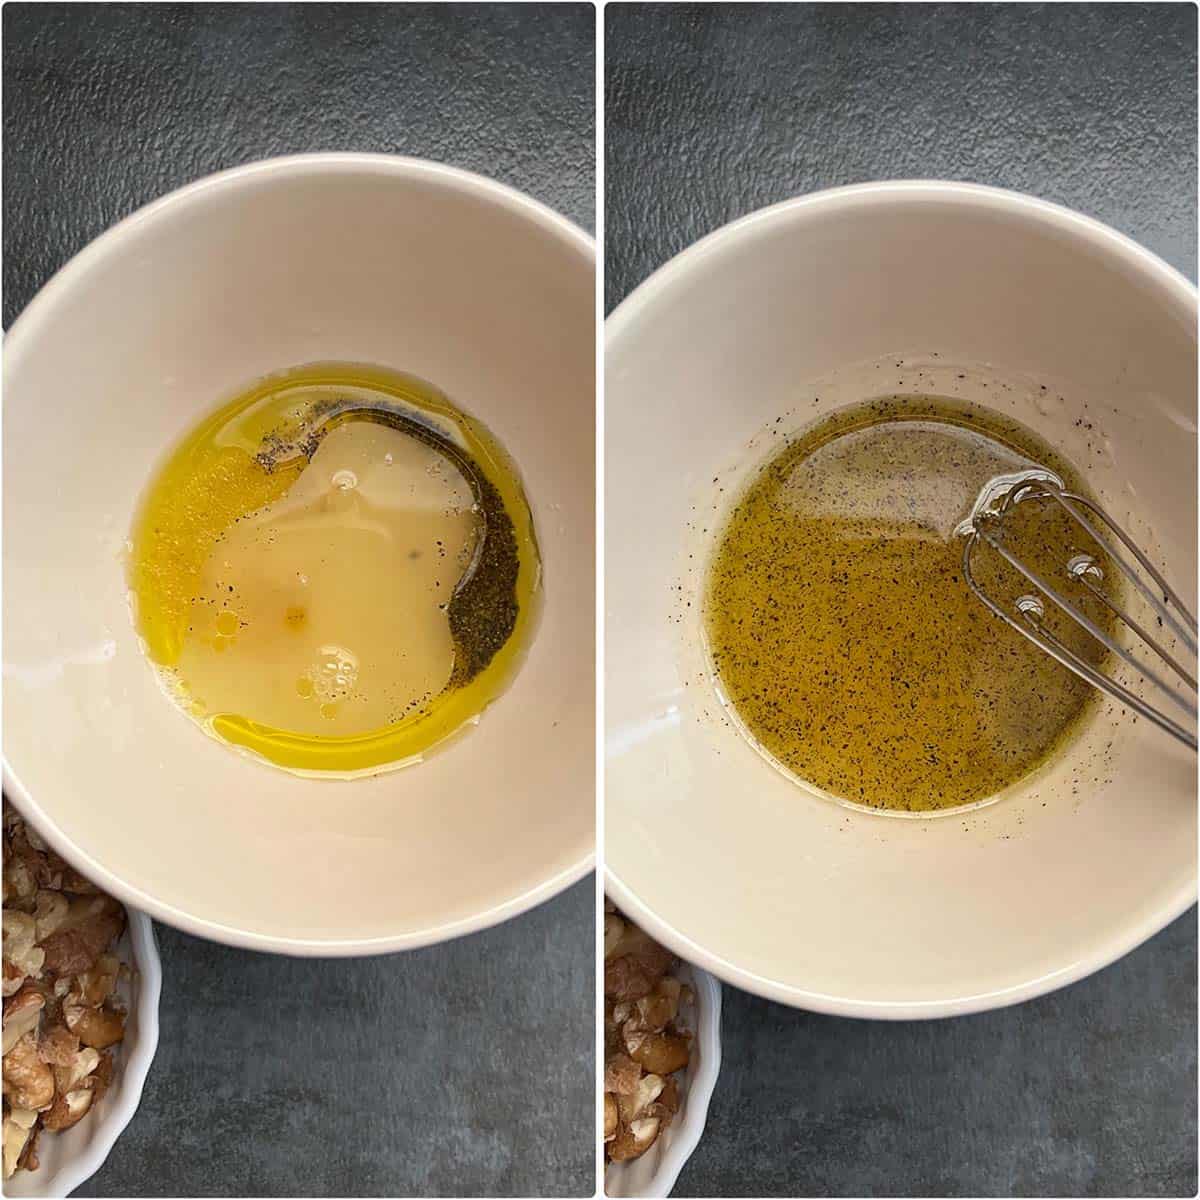 2 panel photo showing the mixing of dressing ingredients.